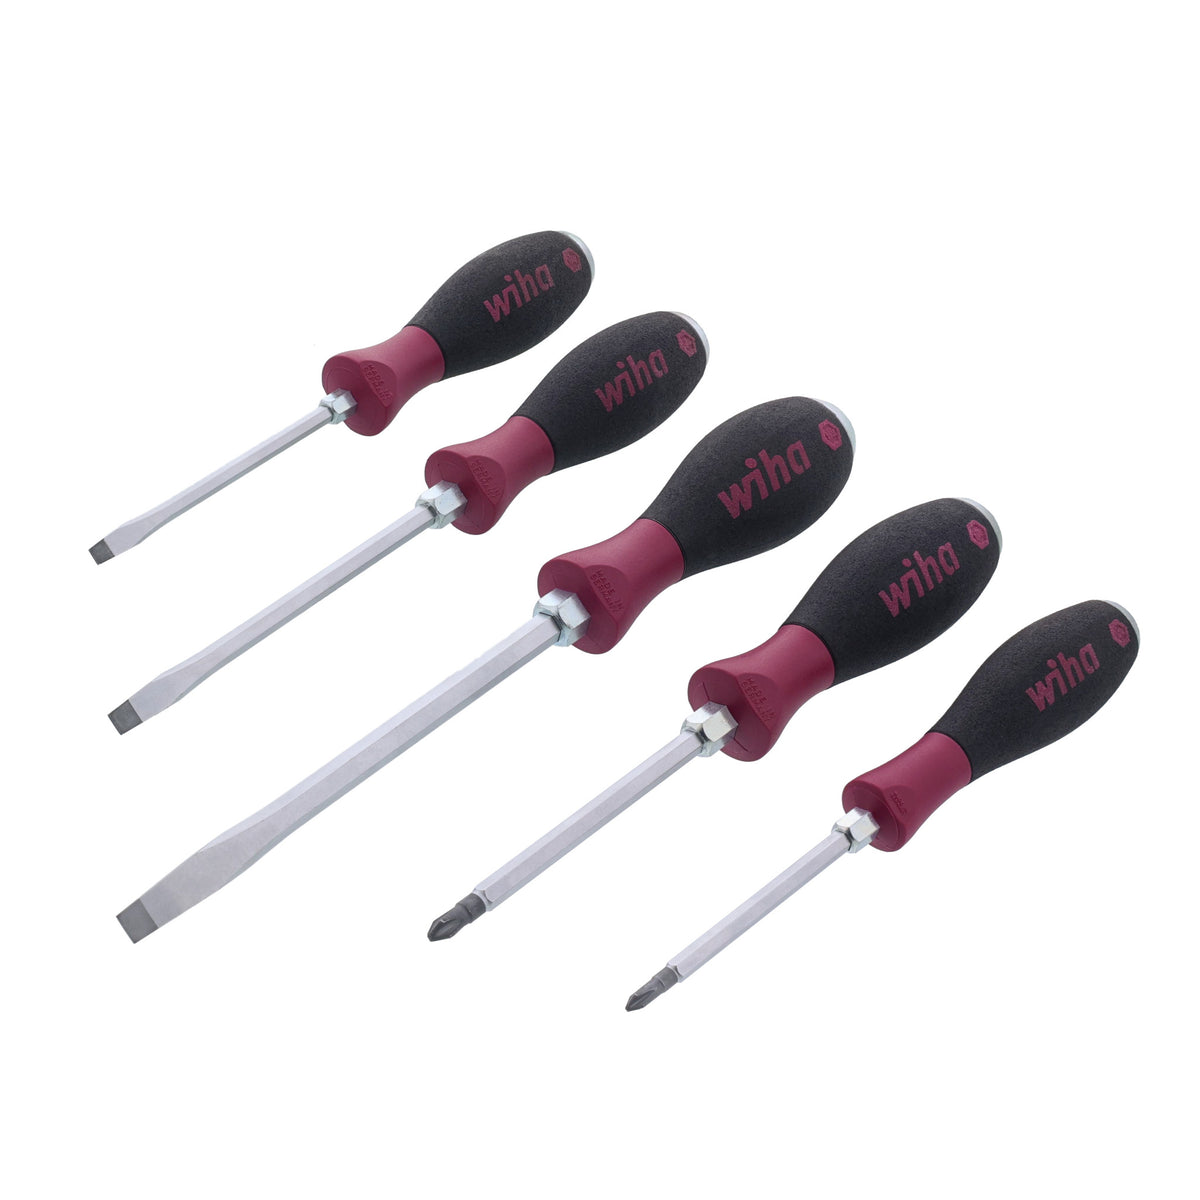 Wiha 53390 5 Piece MicroFinish XHeavy Duty Slotted and Phillips Screwdriver Set